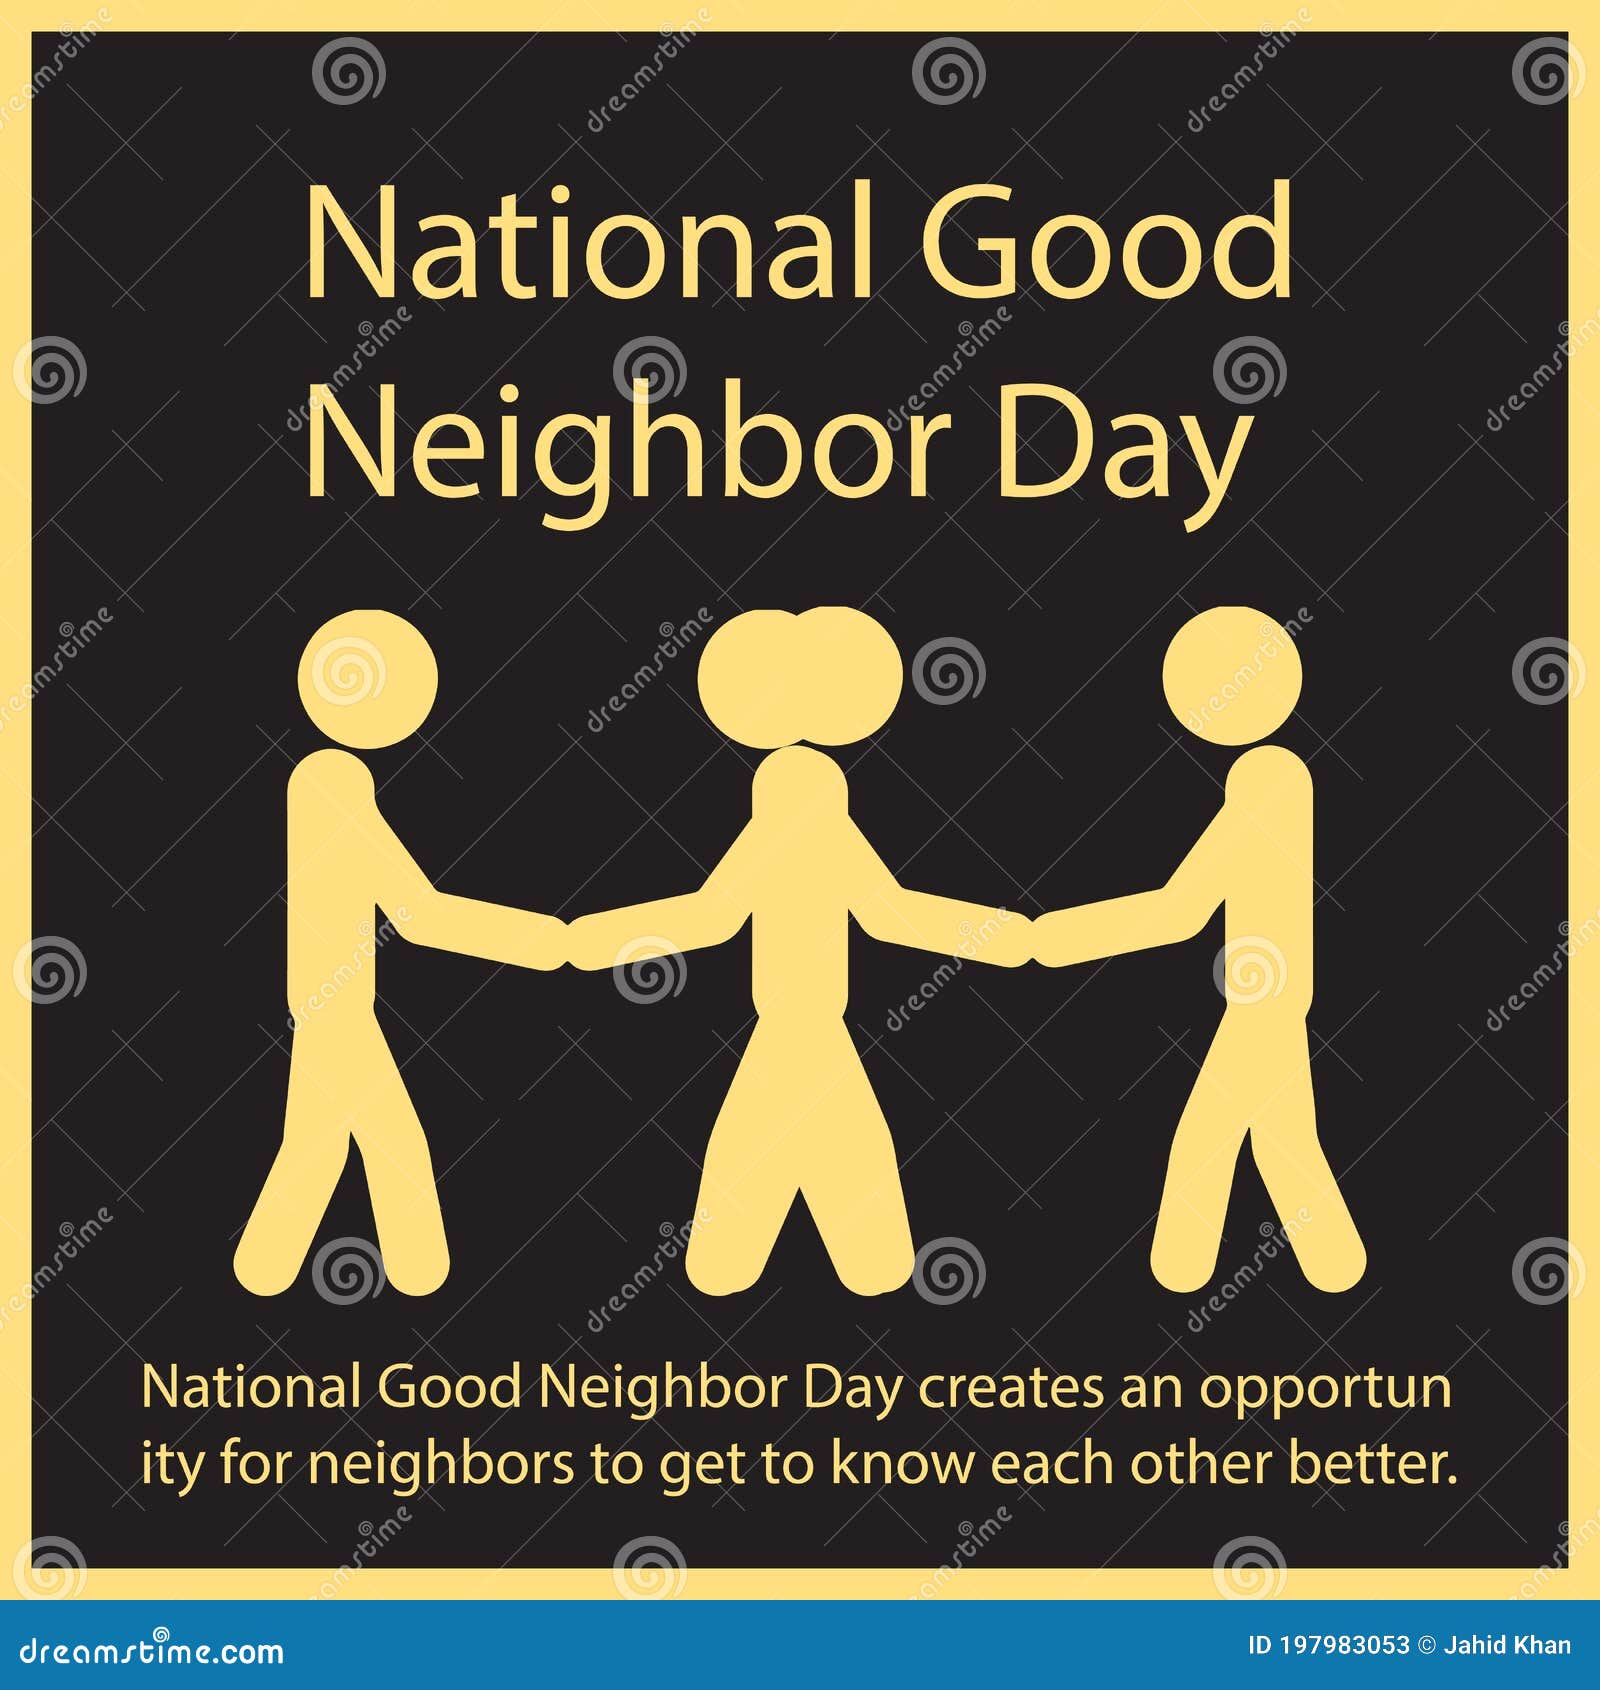 https://thumbs.dreamstime.com/z/national-good-neighbor-day-creates-opportunity-neighbors-to-get-know-each-other-better-197983053.jpg